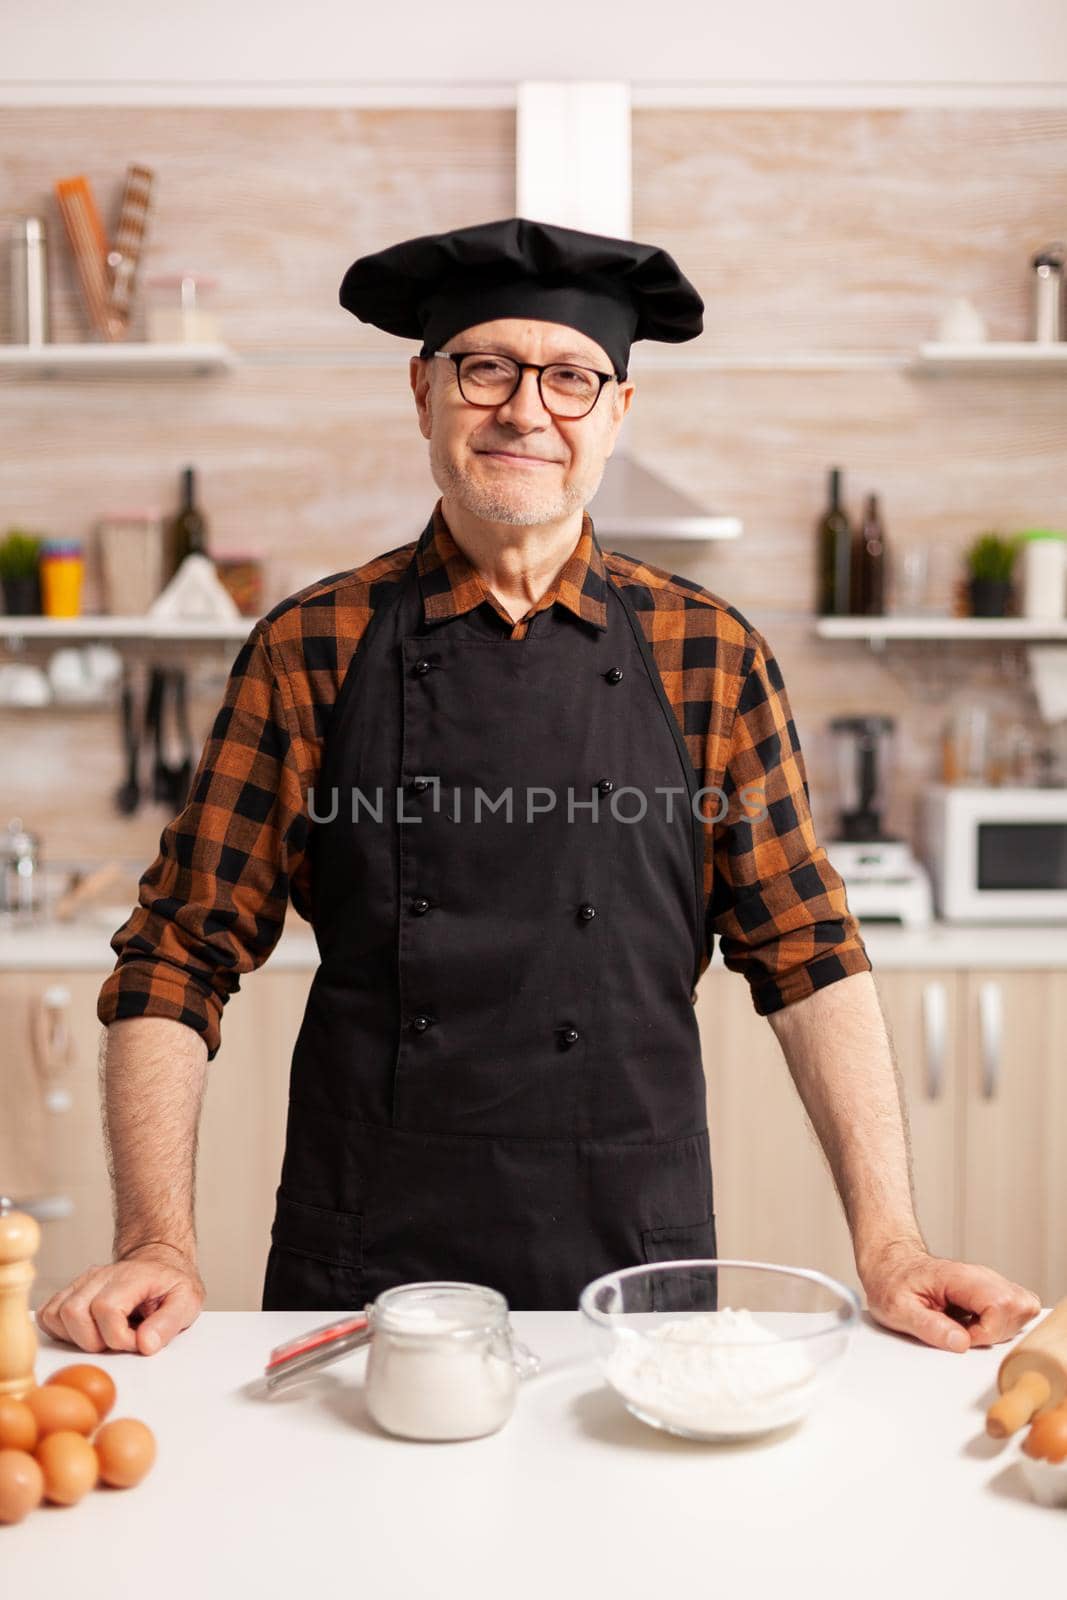 Senior baker smiling looking at camera in kitchen Retired elderly chef in kitchen uniform preparing pastry ingredients on wooden table ready to cook homemade tasty bread, cakes and pasta